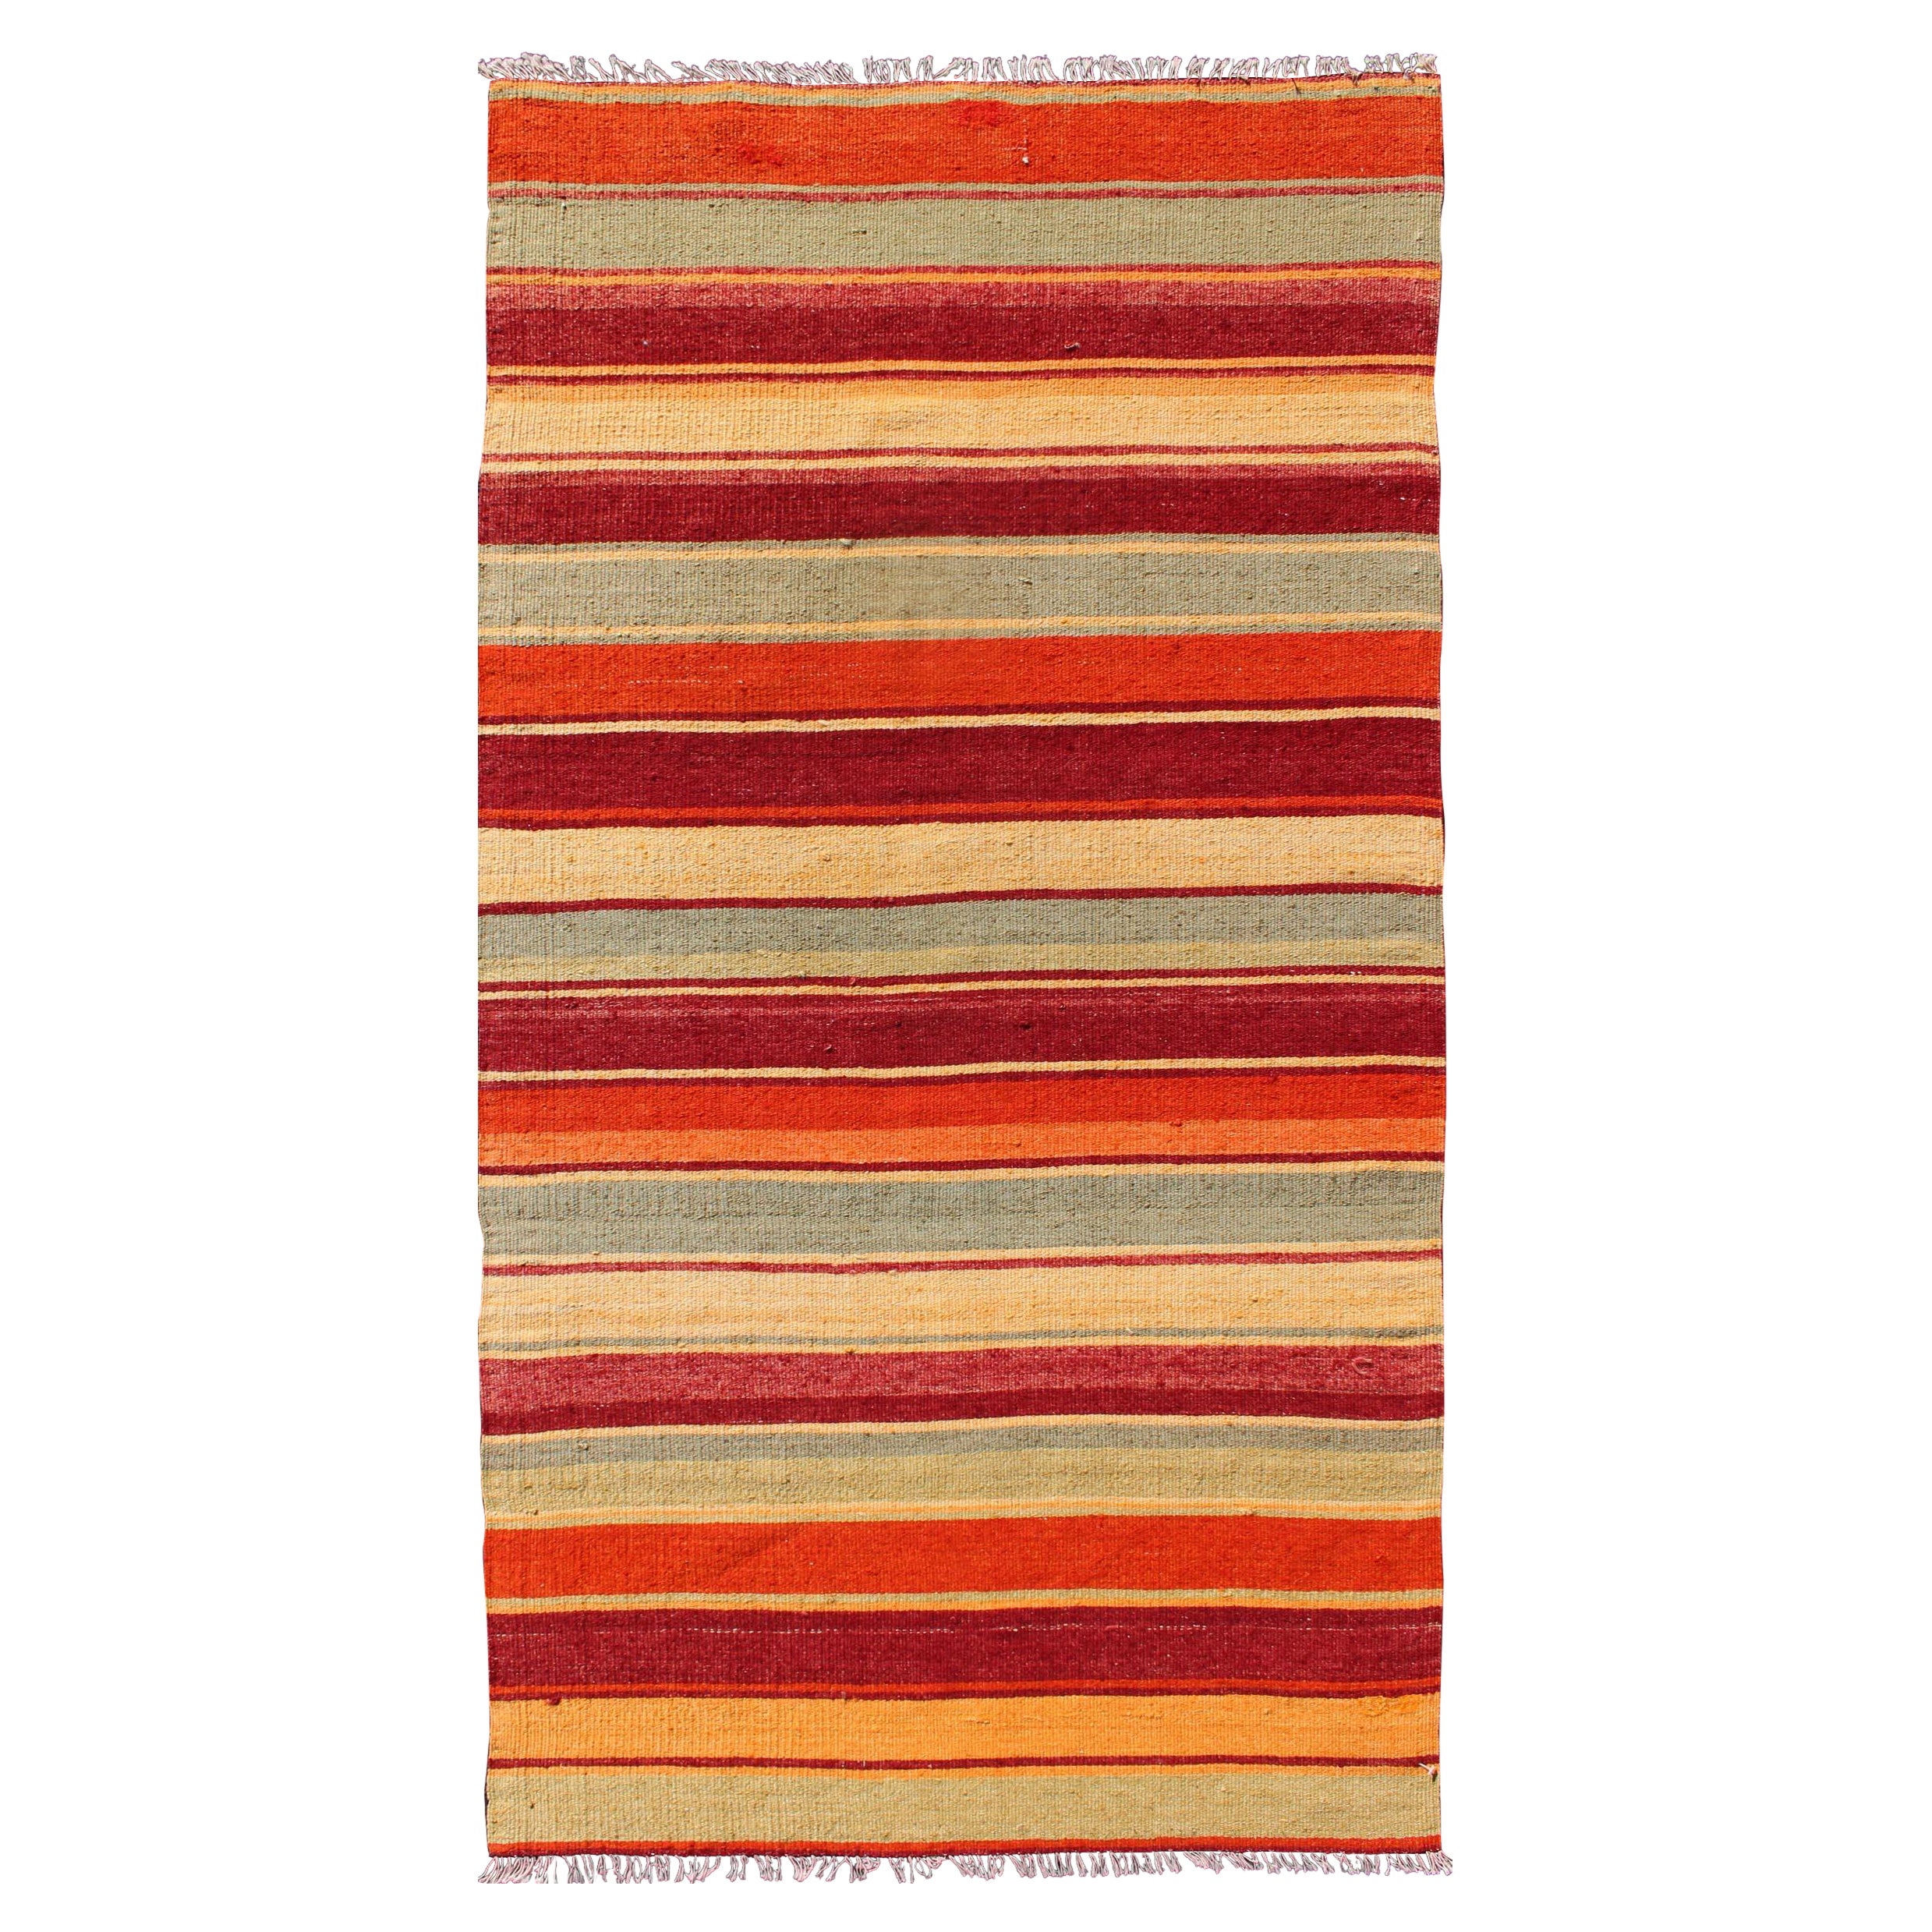 Vintage Turkish Kilim Runner with Stripes in Red, Green, Yellow, and Orange